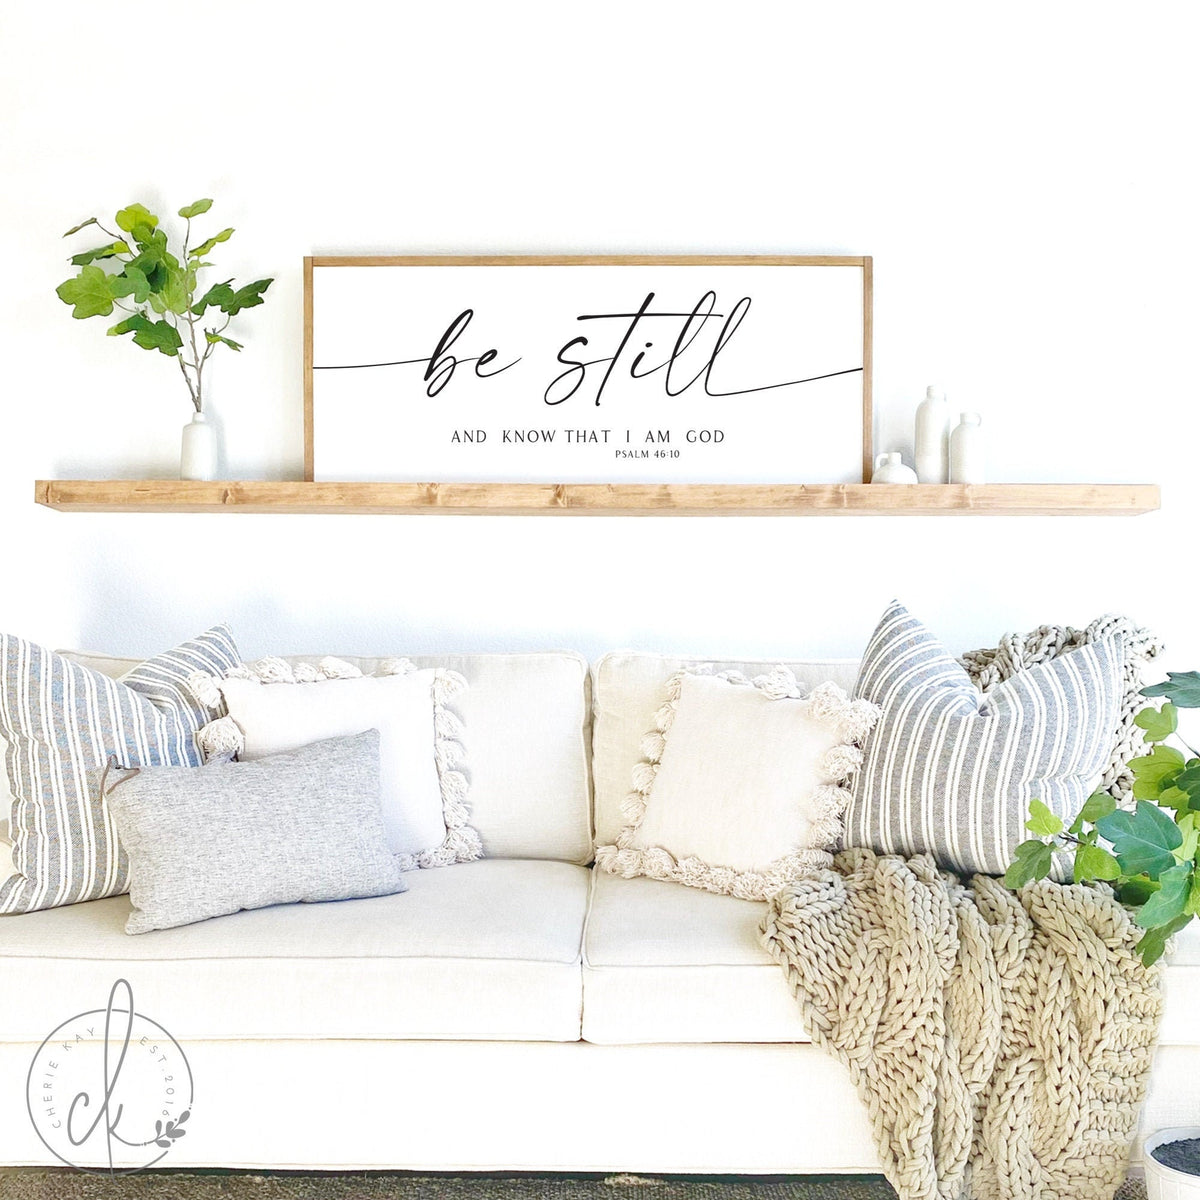 scripture wall decor | be still and know sign | living room decor | bible verse sign | Psalm 46:10 | bible verse sign